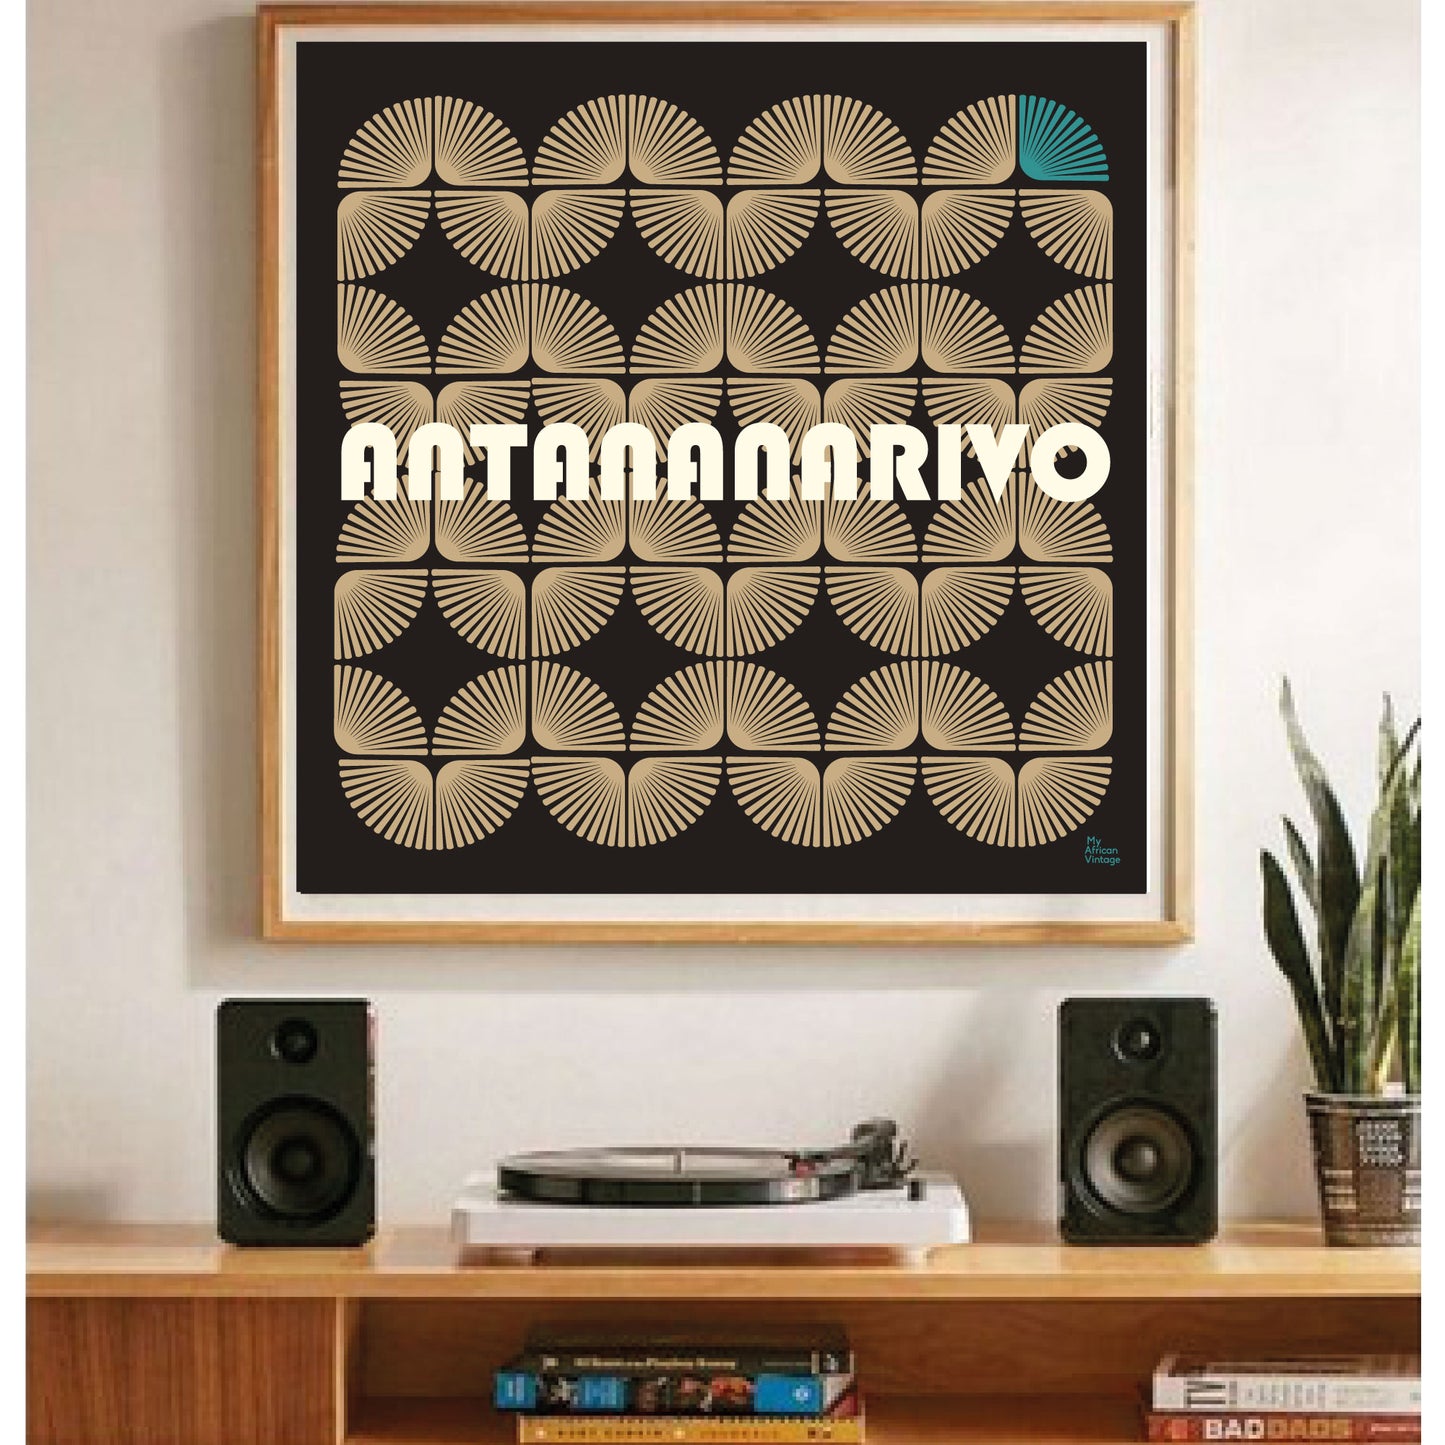 Affiche style rétro "Antananarivo" - collection "My African Vintage"